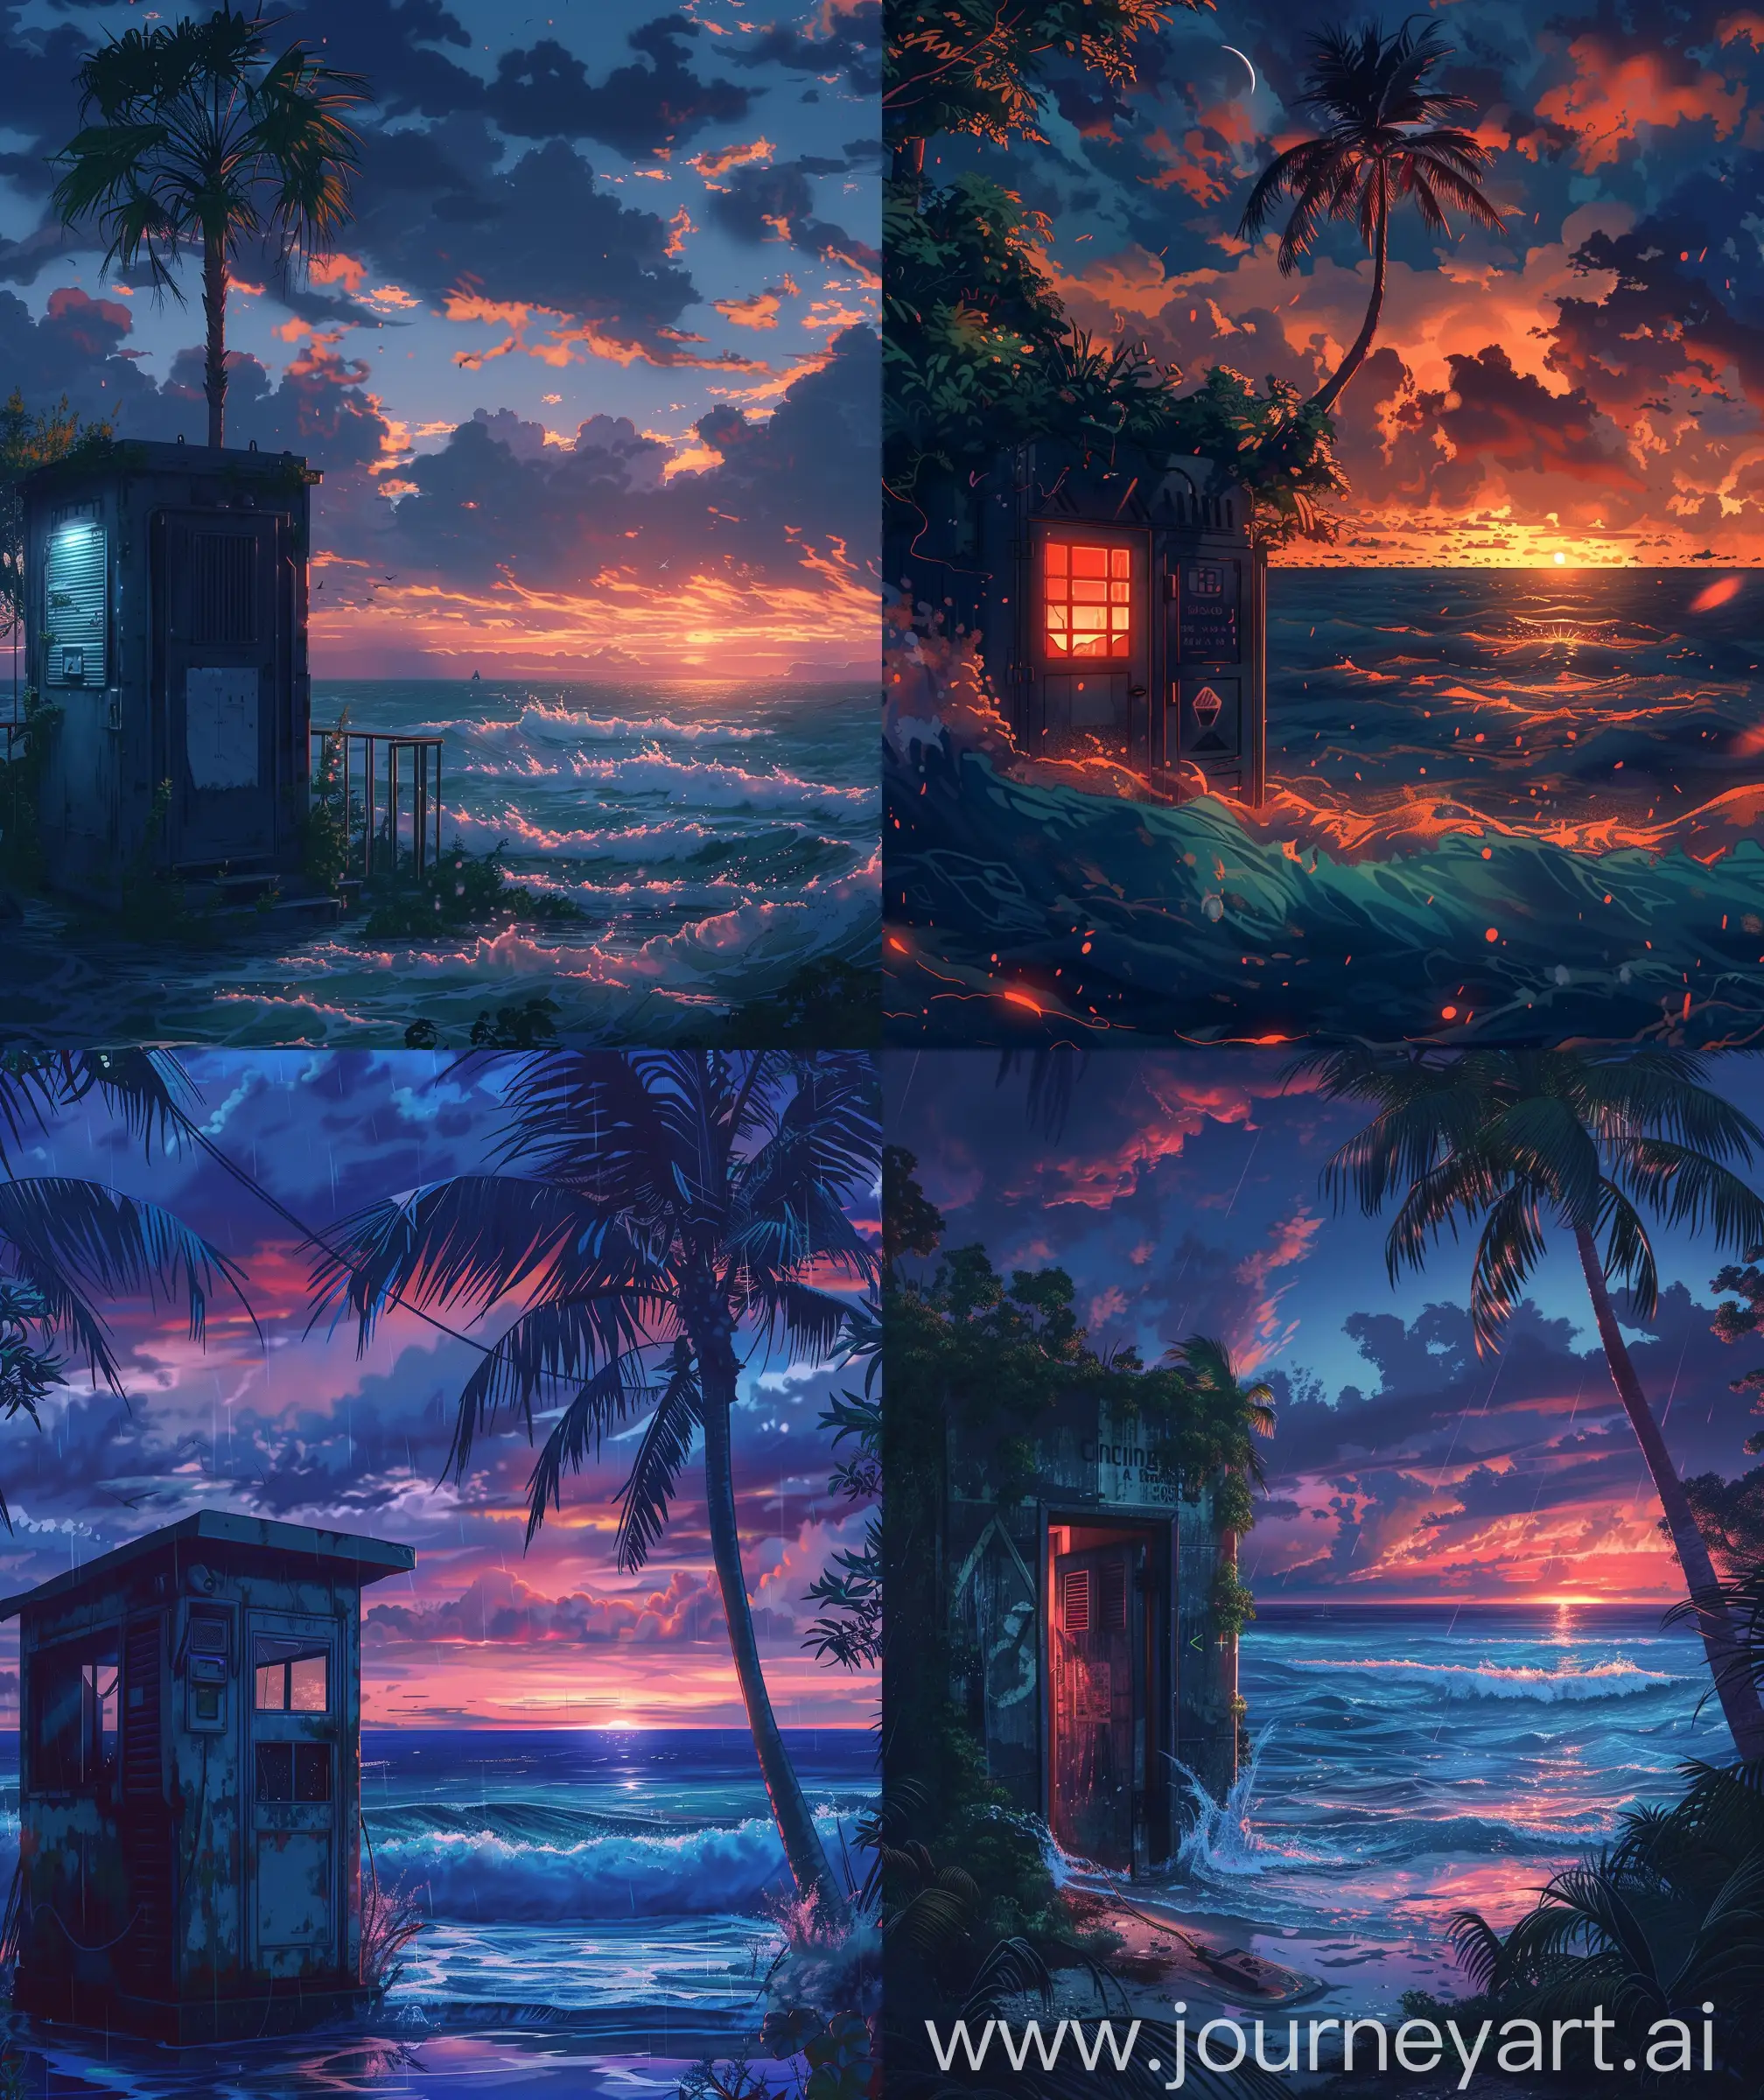 Twilight-Anime-Scenery-Old-Communication-Cabin-by-the-Ocean-at-Sunset